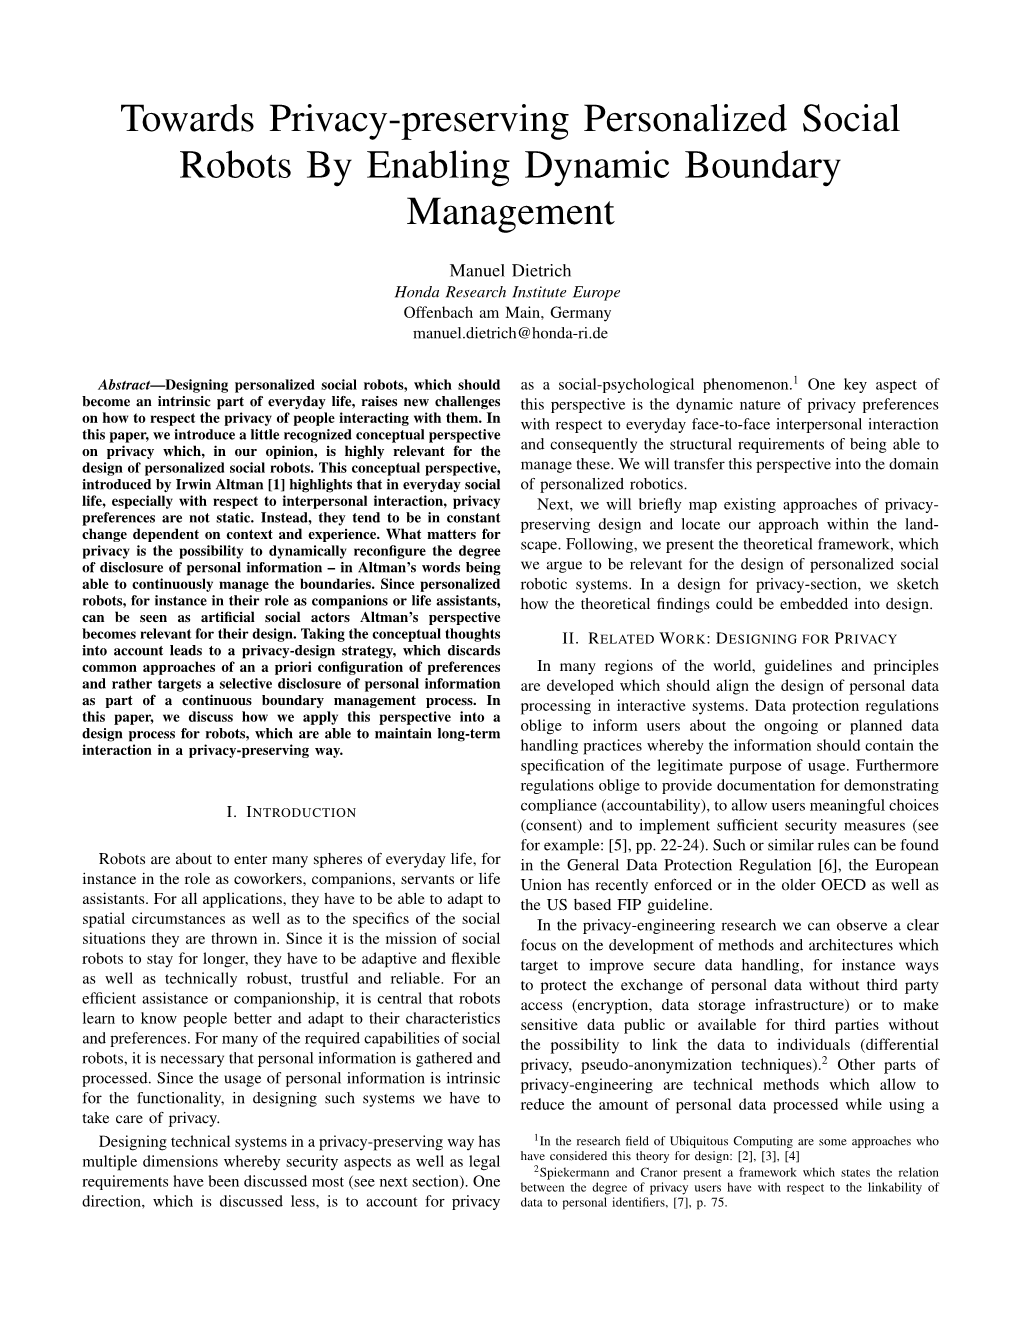 Towards Privacy-Preserving Personalized Social Robots by Enabling Dynamic Boundary Management